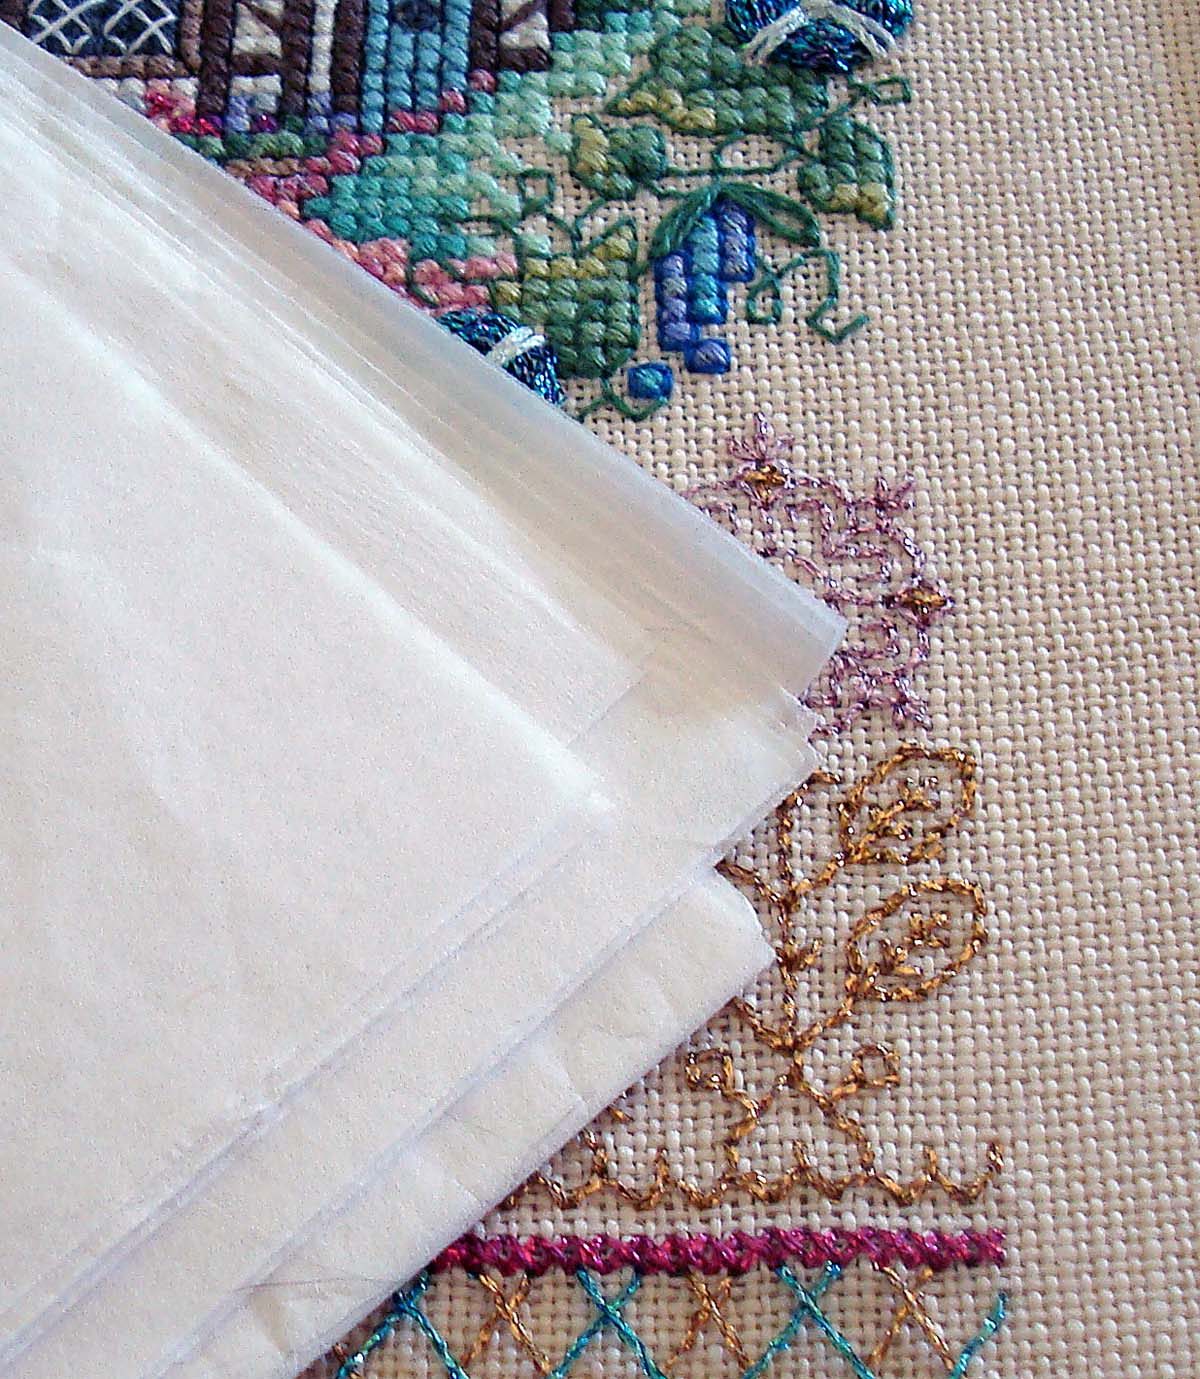 Preserve jewelry, photos, textiles, plus finished and unfinished needlework projects with Acid-Free Tissue Paper.